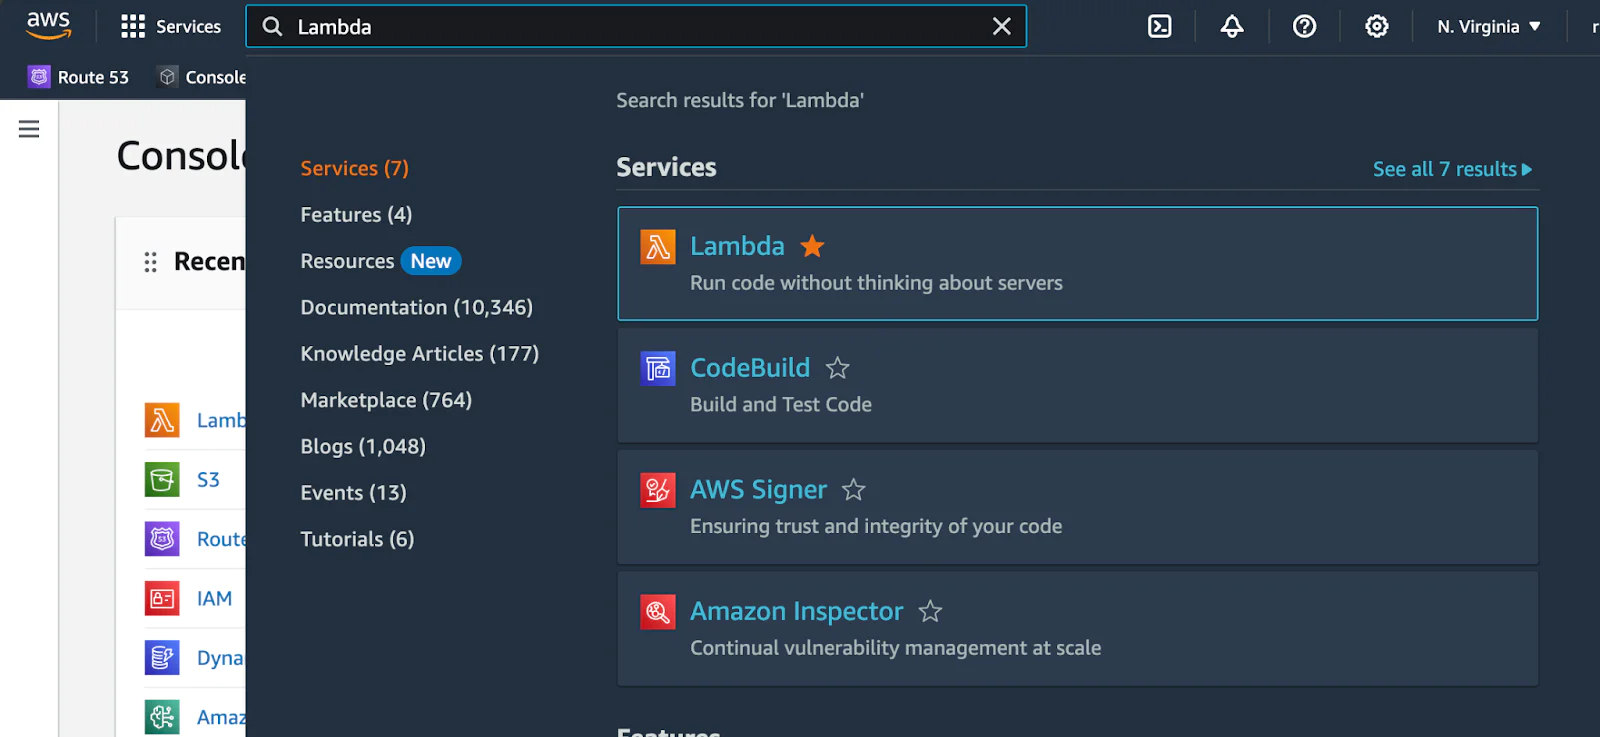 AWS Management Console with Lambda Service in search